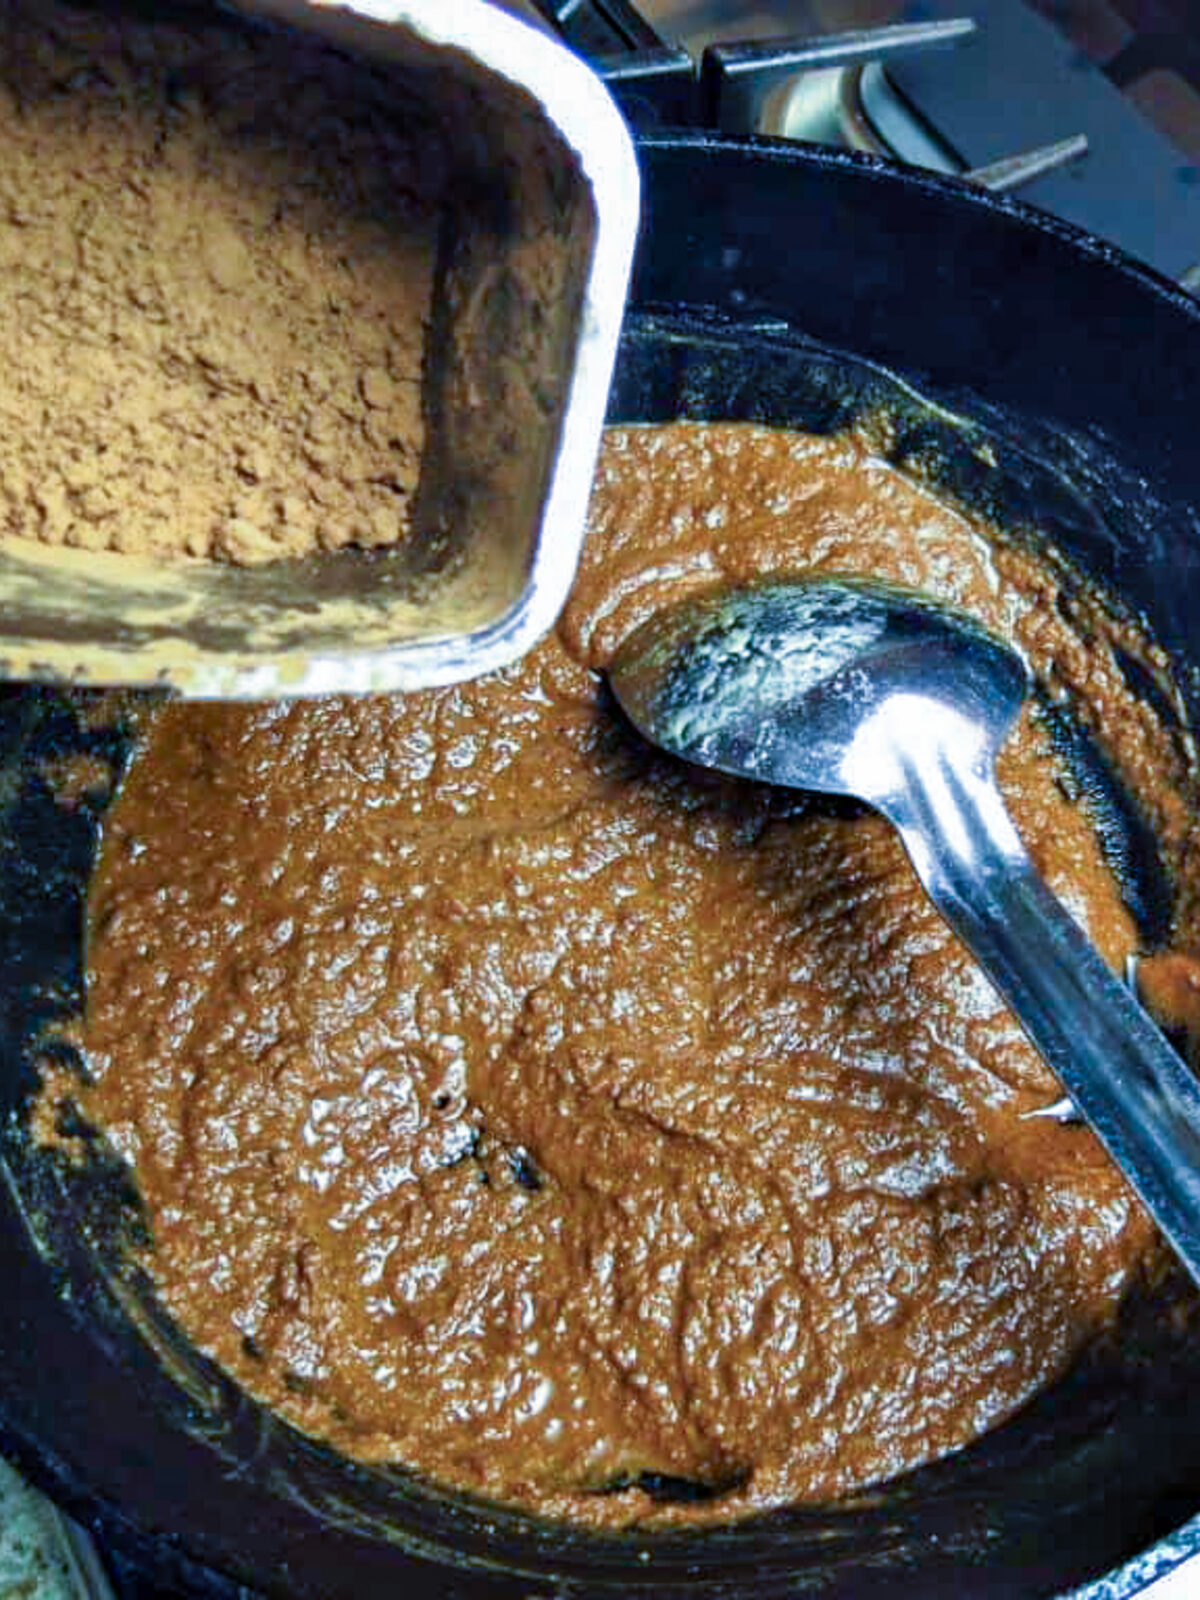 A black pot of medium-colored roux with a silver spoon and a container of cooa powder near near the top of the photo for a Cajun roux recipe.